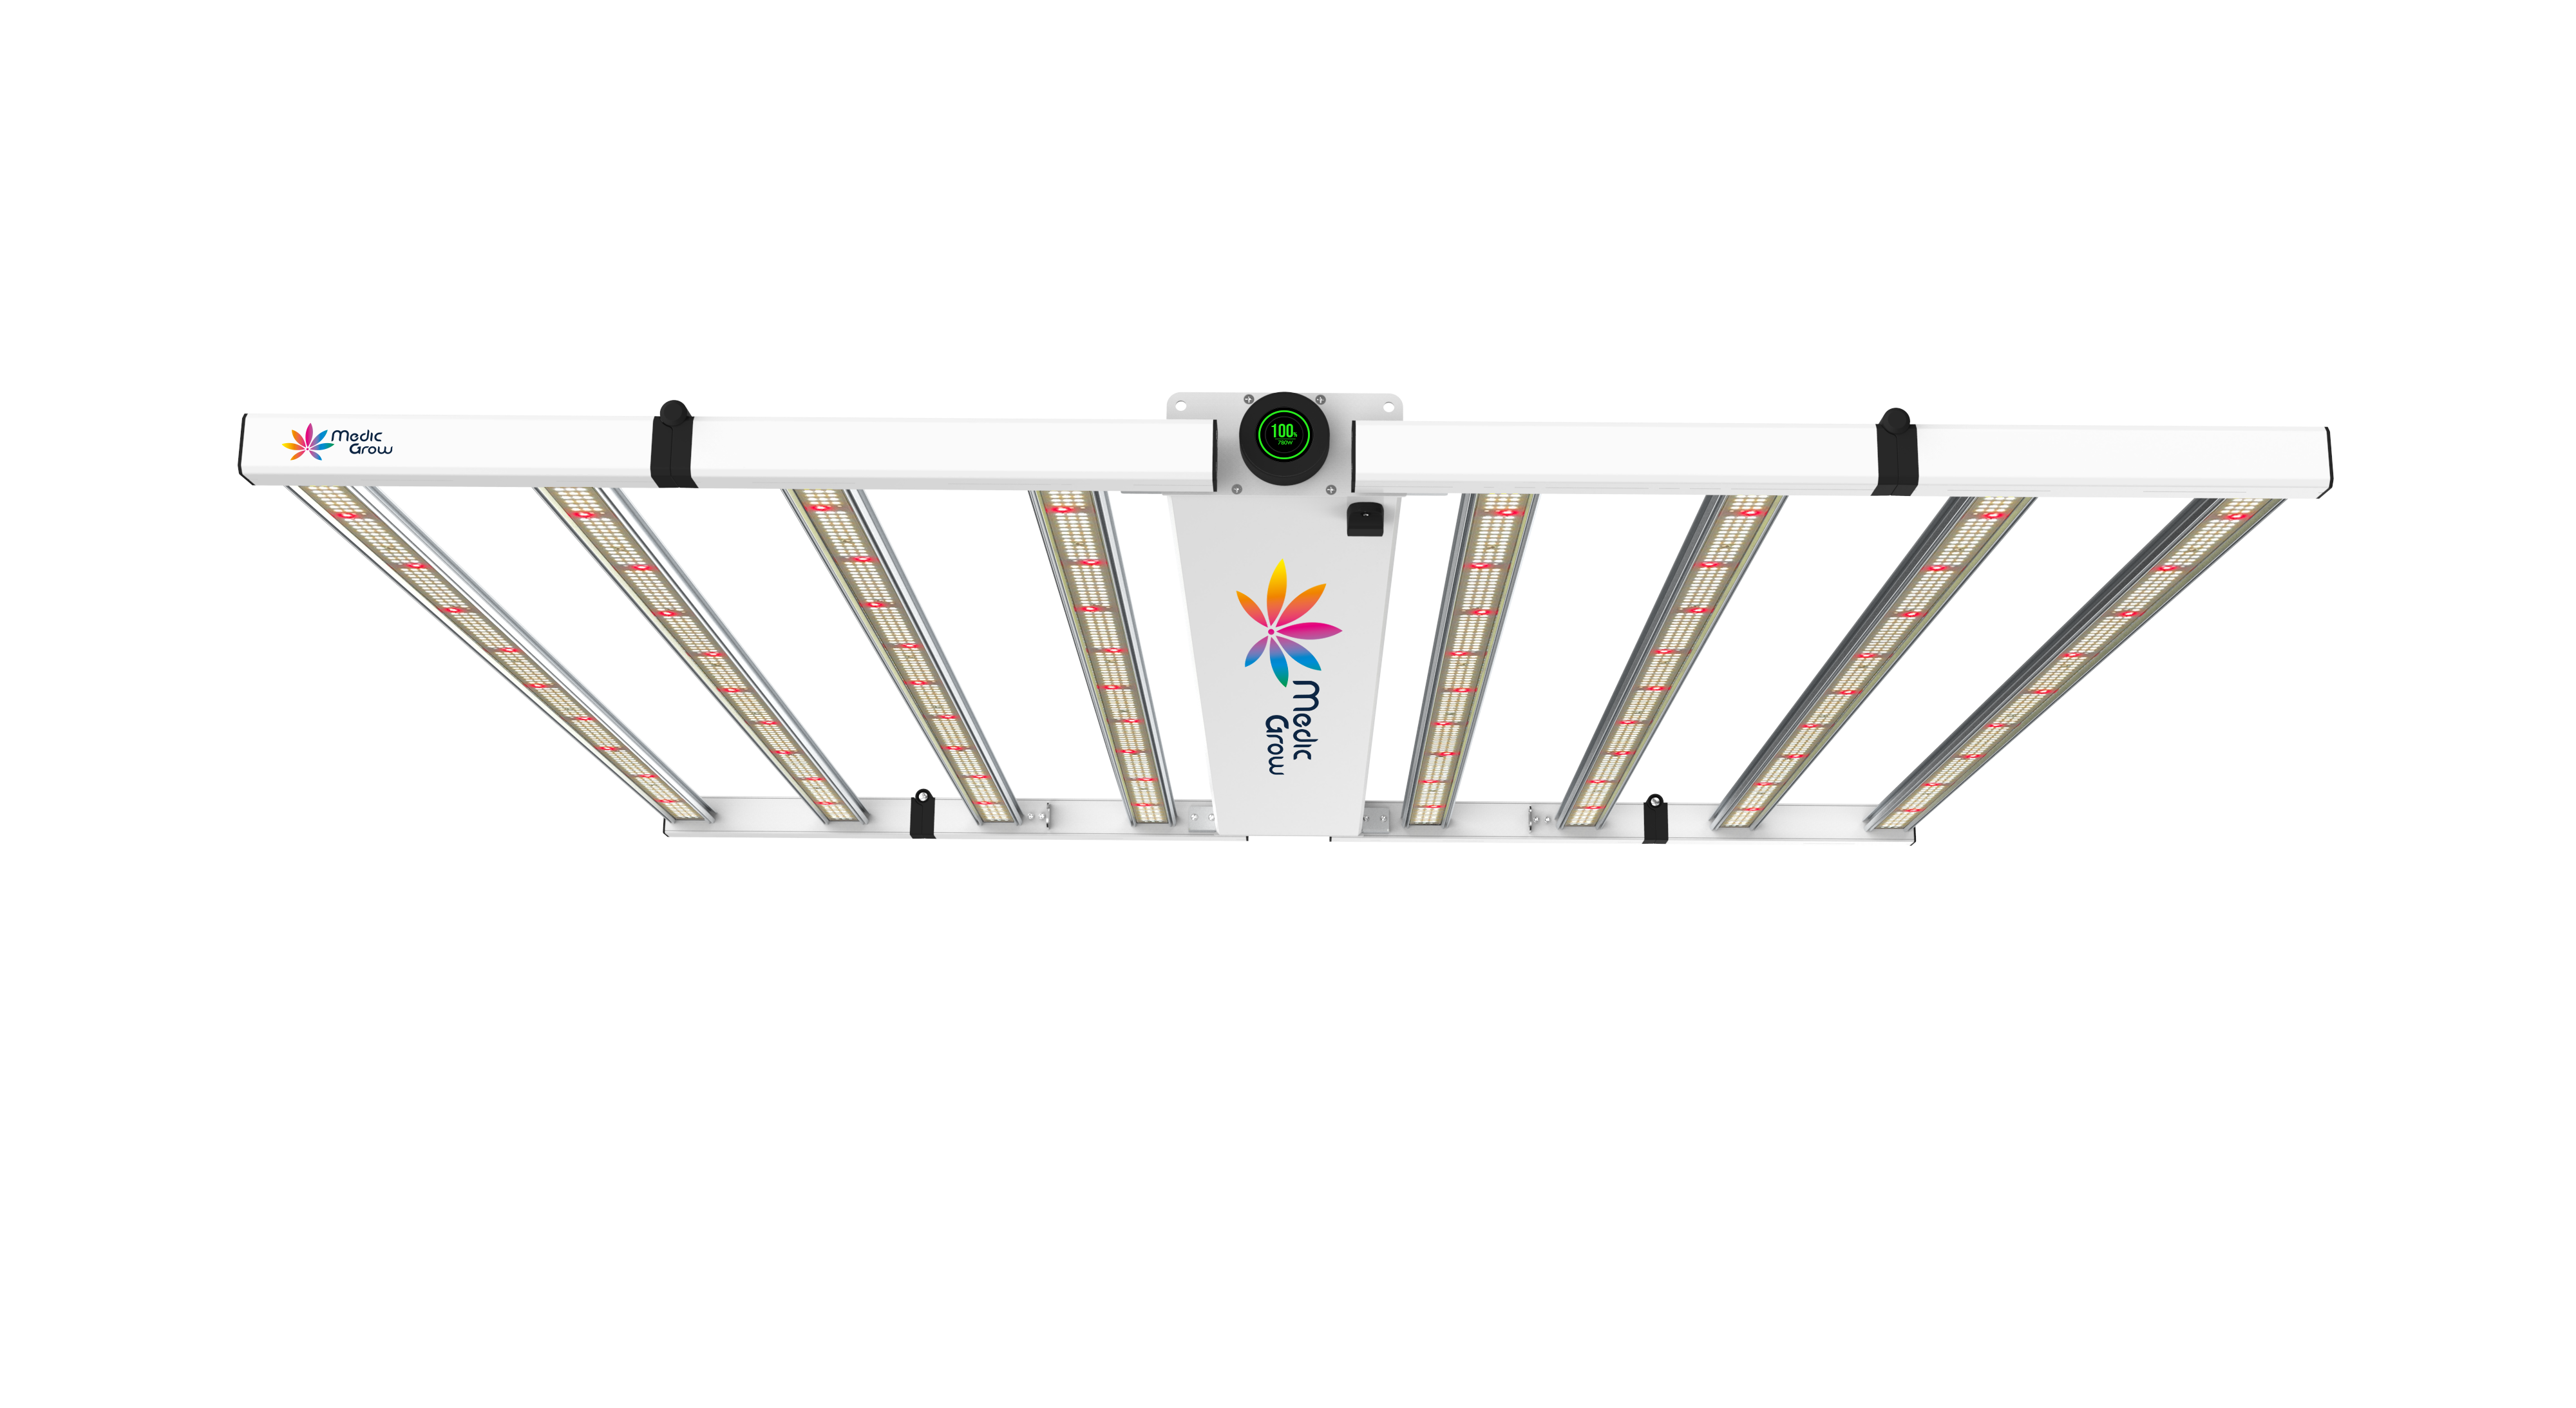 Medic grow NEO-780 Full Spectrum LED Grow Light for Indoor Plants - 780W, covers 4x4 5x5, high PPFD, WIFI Daisy Chain, AC 110-270V